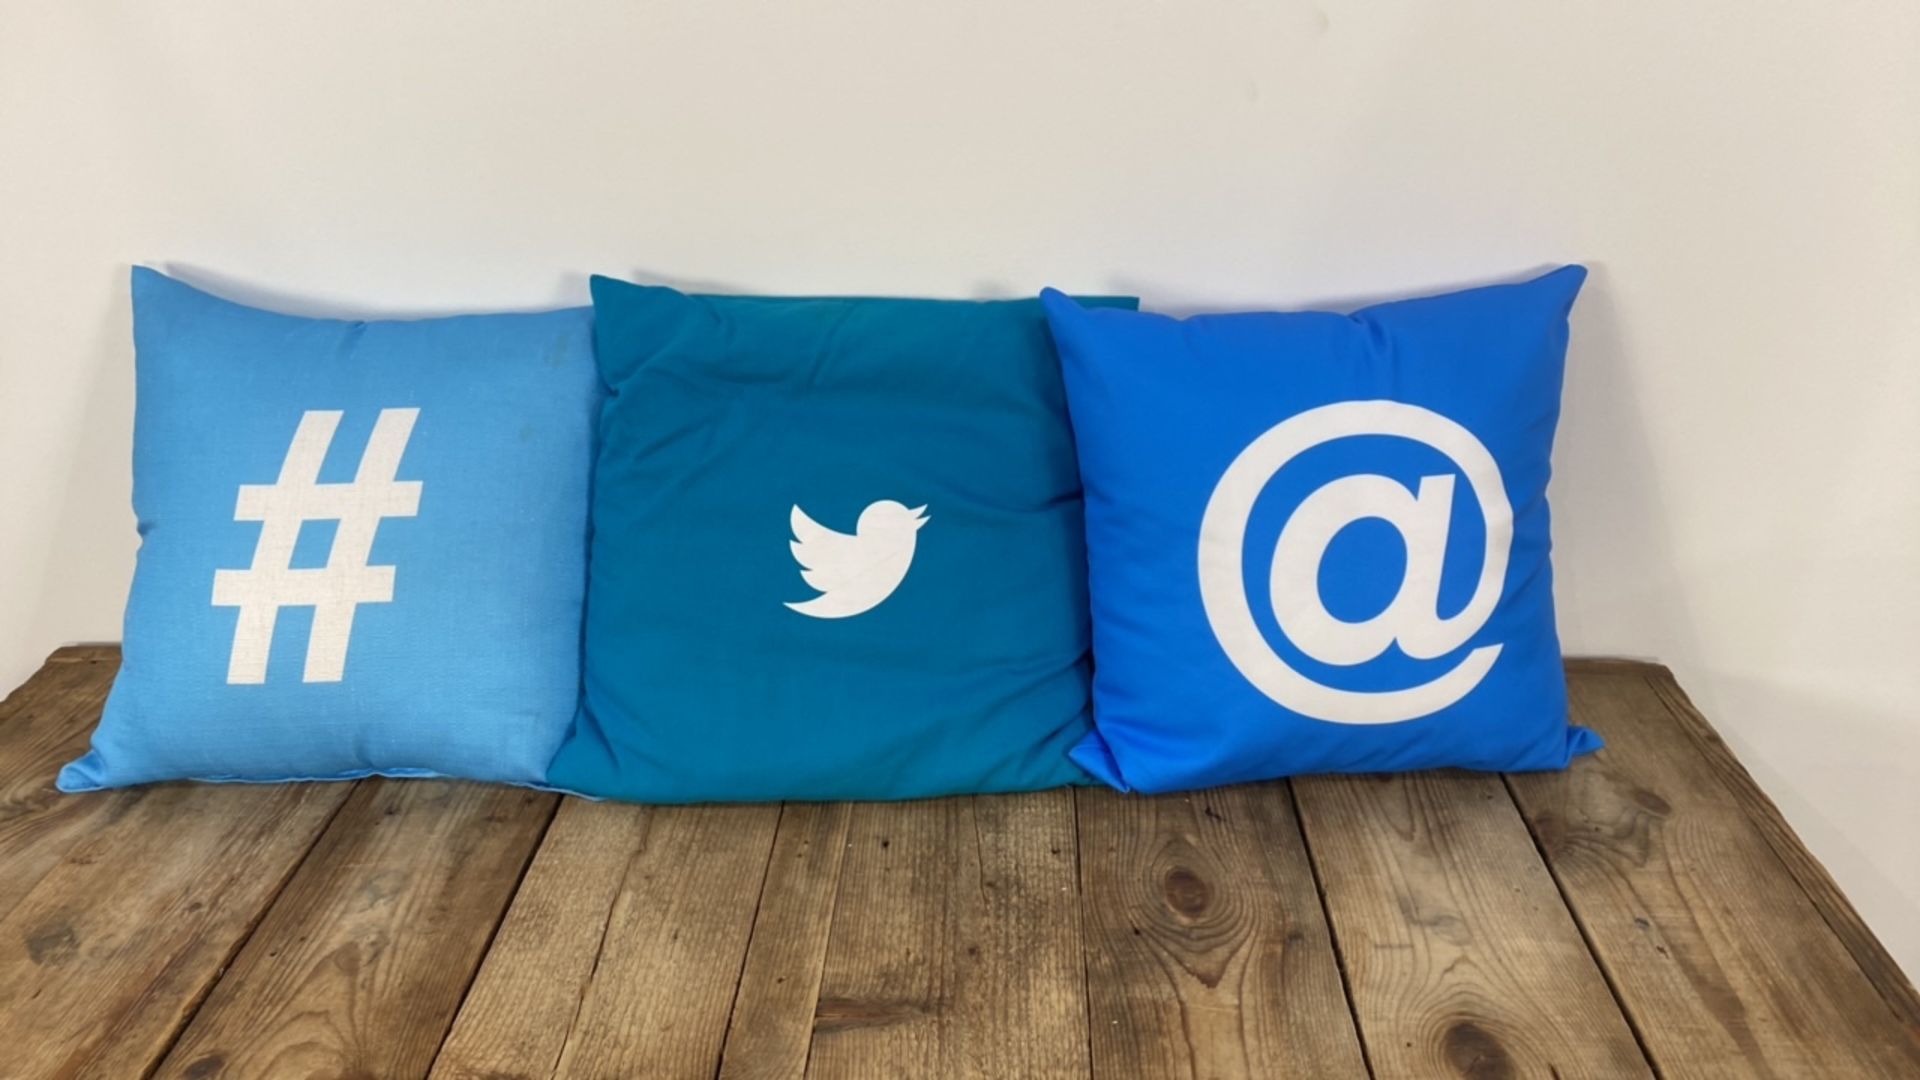 Twitter Cushions X3 - Image 2 of 3